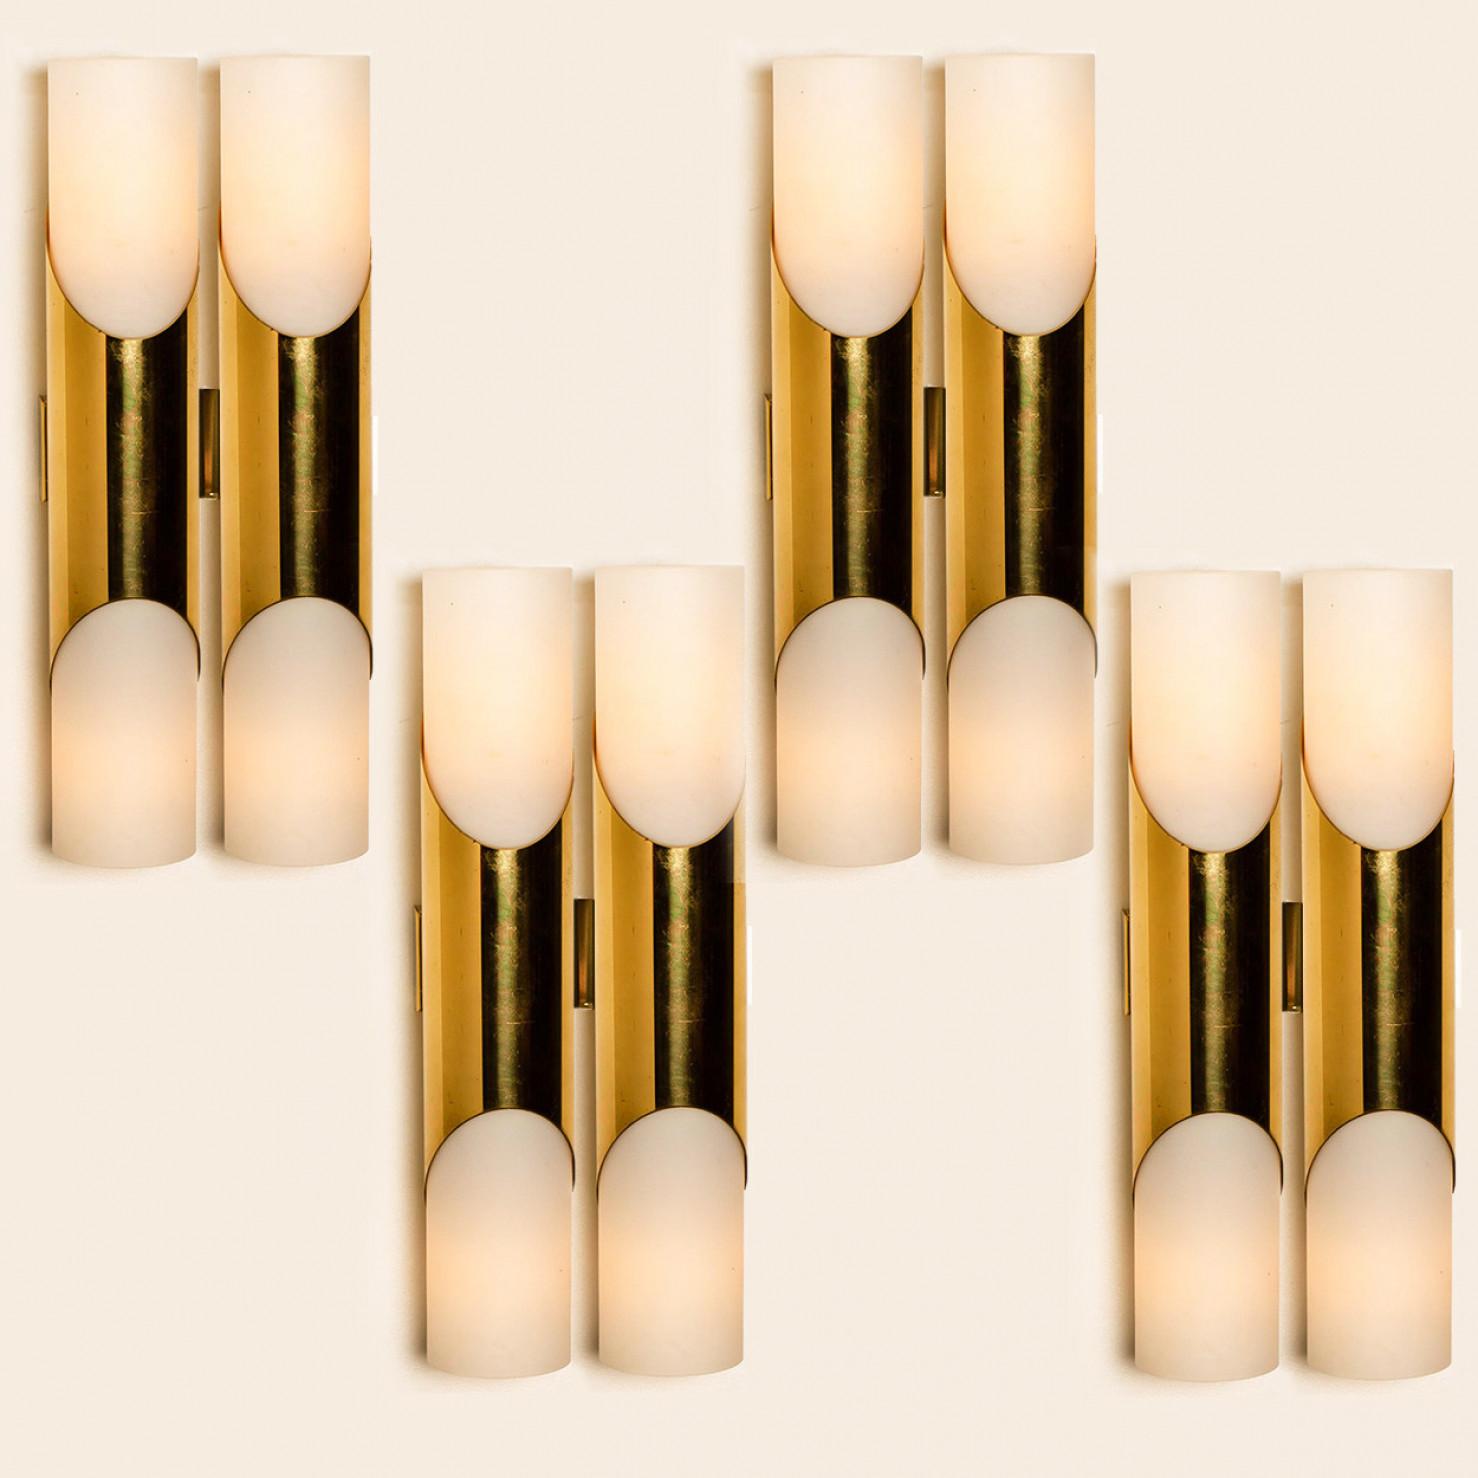 Stunning wall sconces designed in the style  RAAK, Amsterdam. Minimalistic design executed with a taste for excellence in craftsmanship.
Good condition, that means this piece is not new, but in a very good vintage condition with some beautiful minor